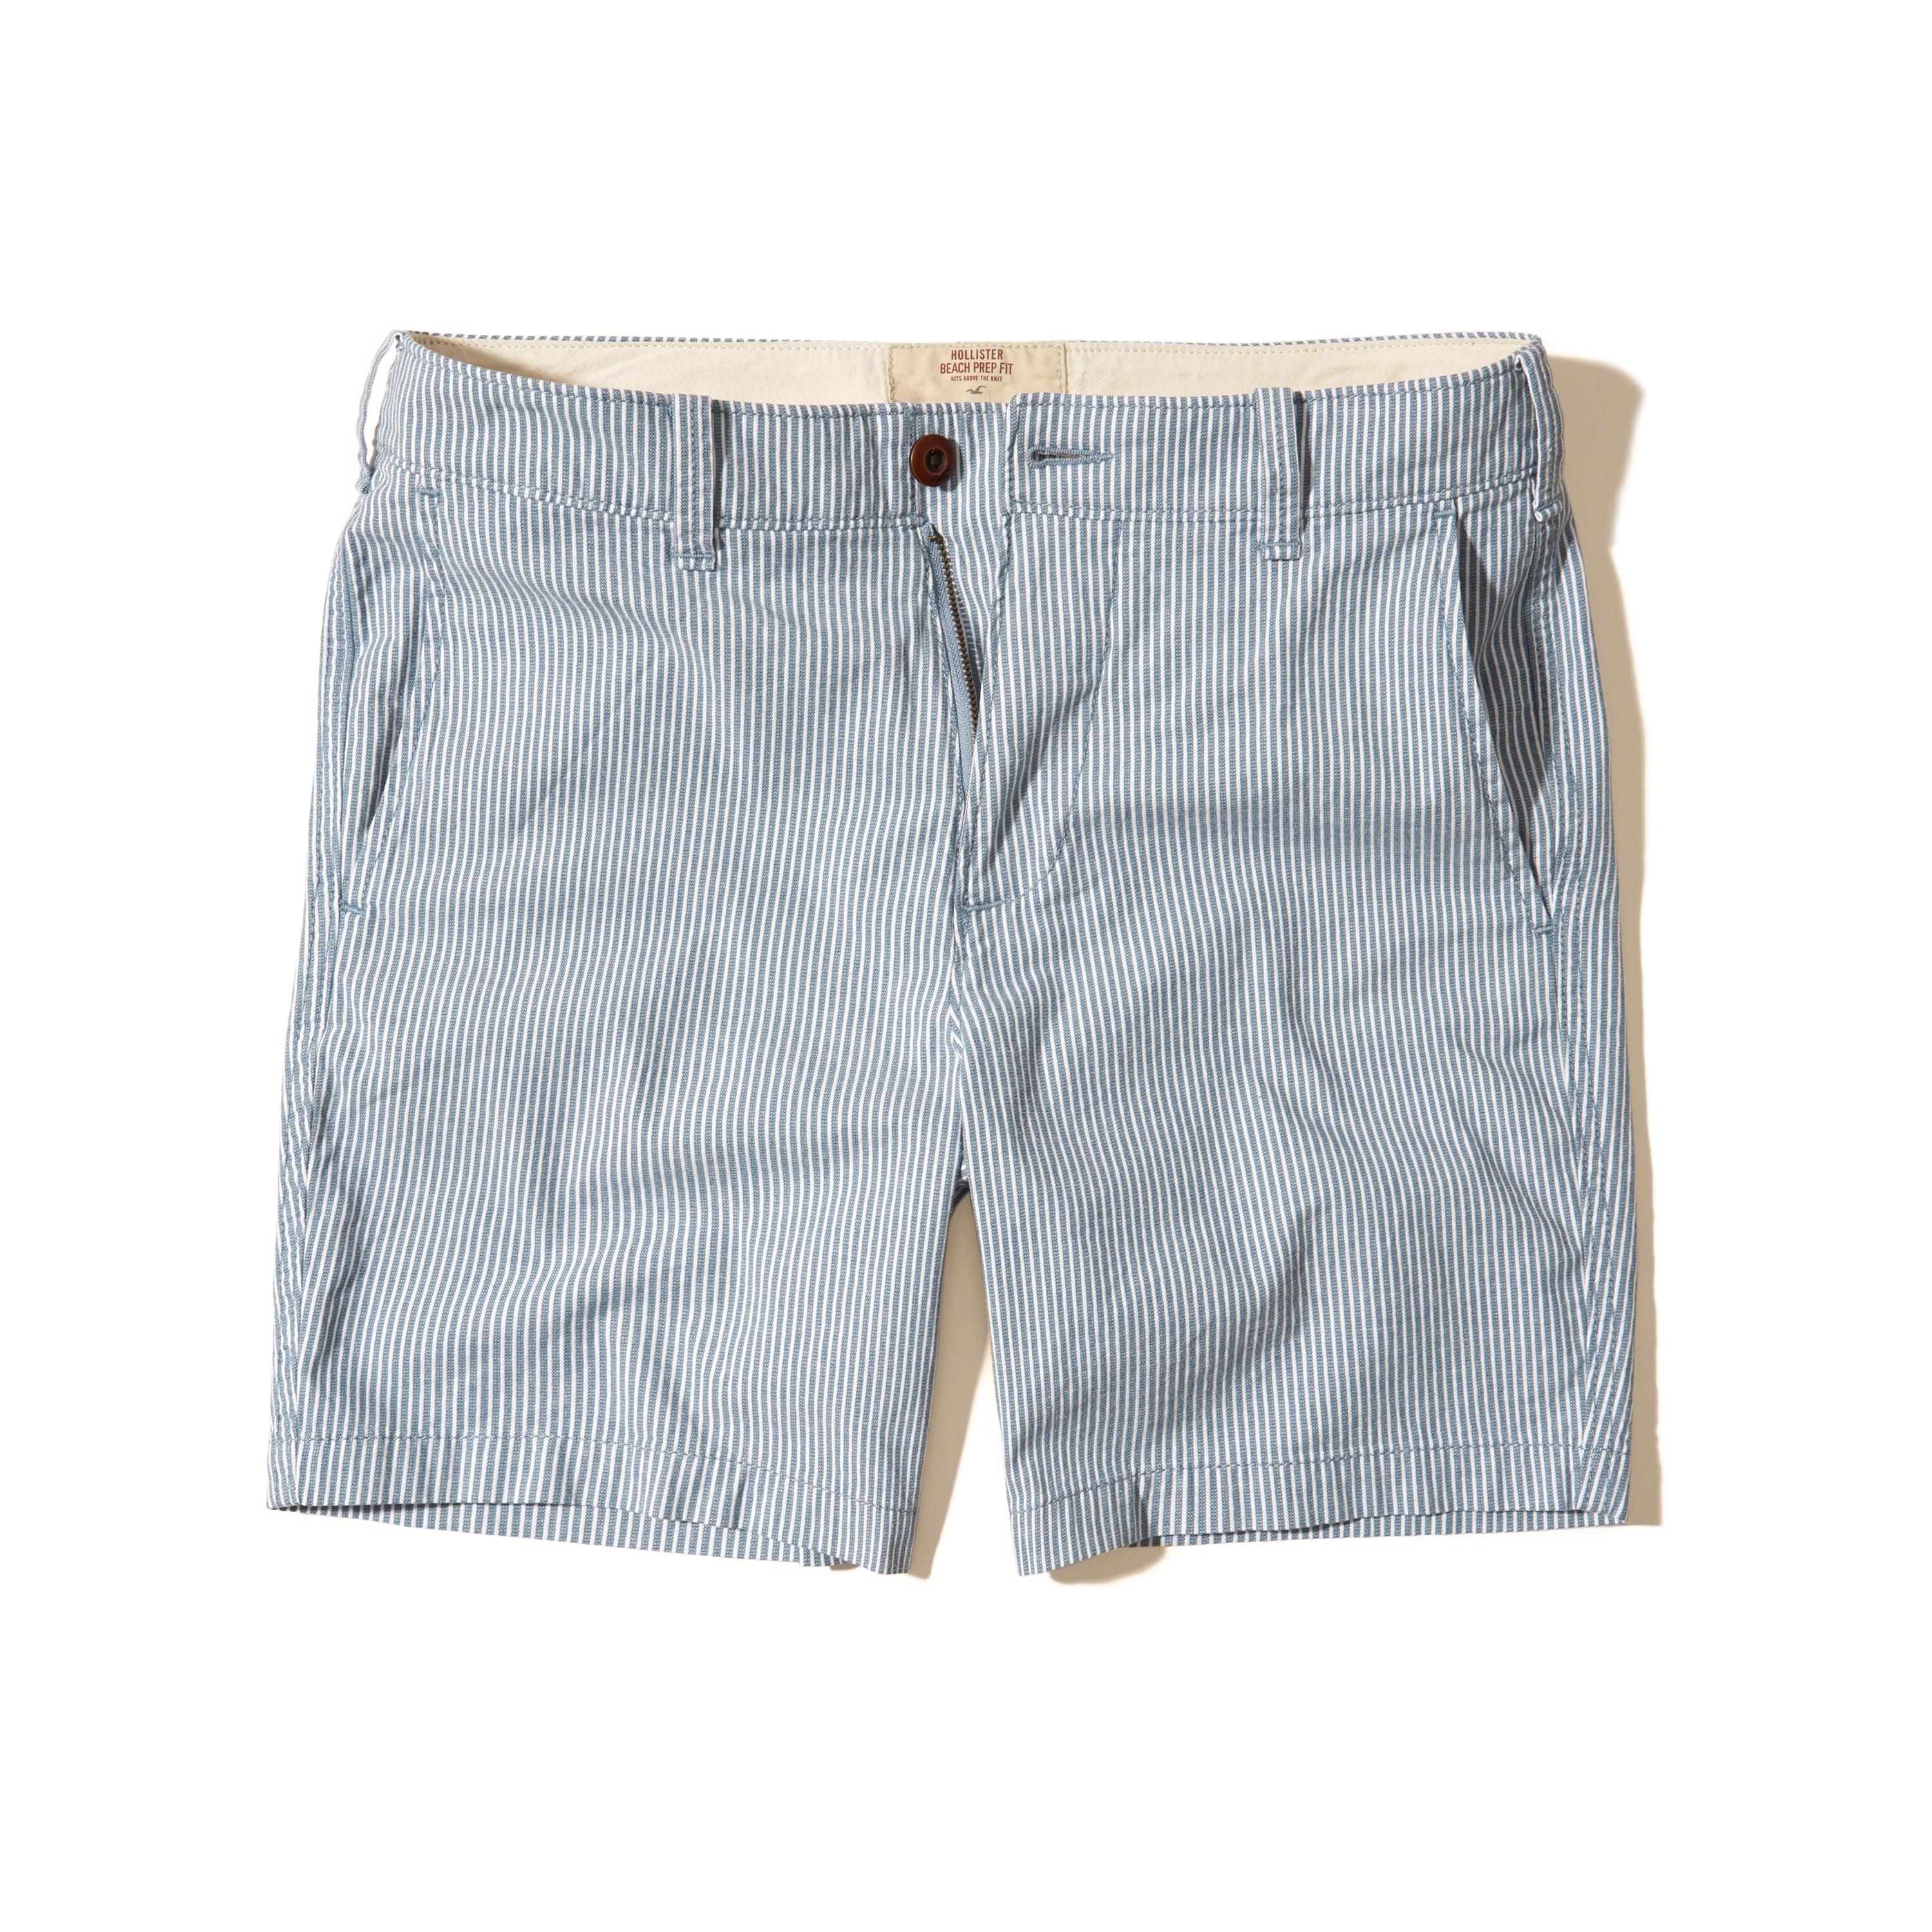 Lyst - Hollister Beach Prep Fit Shorts in Blue for Men